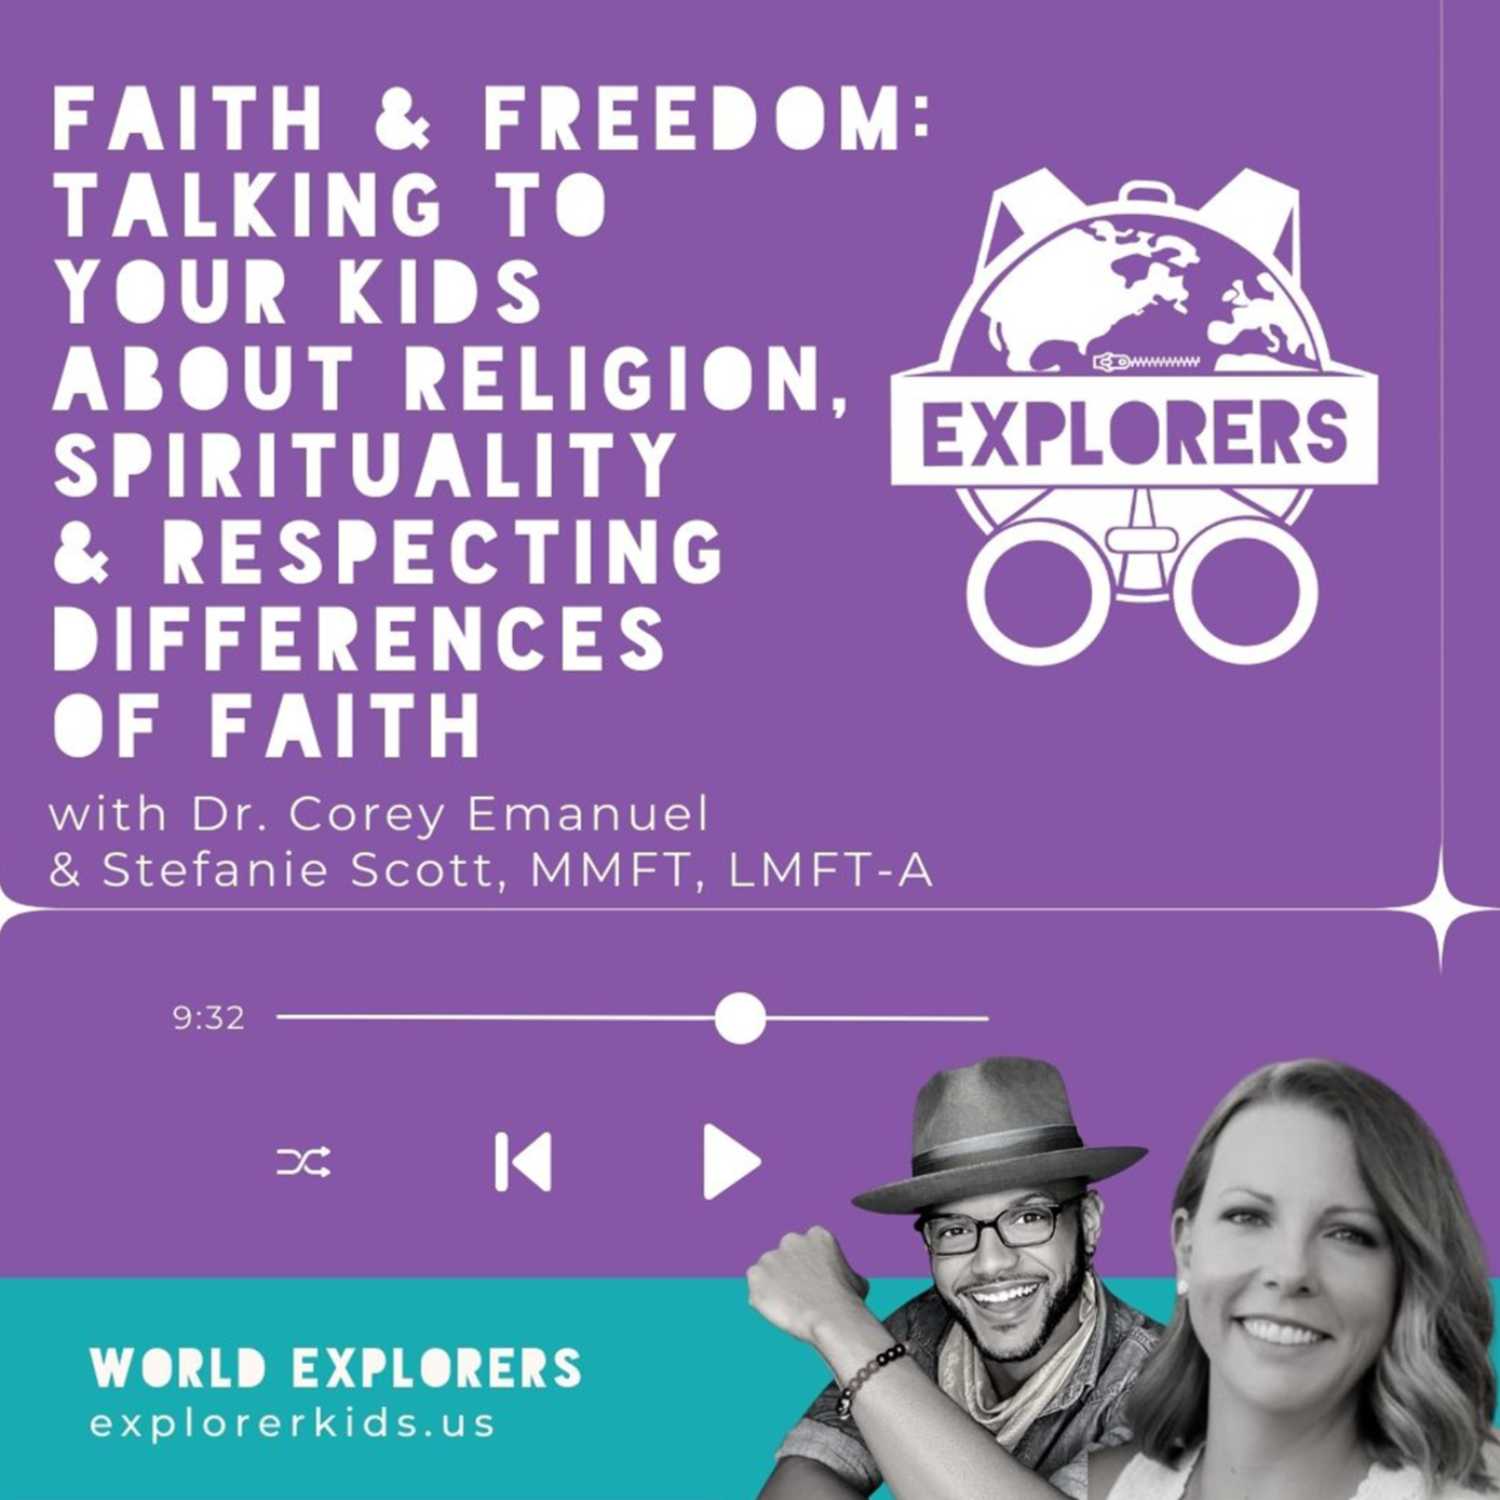 Faith & Freedom: Talking to Your Kids about Religion, Spirituality & Respecting Differences of Faith